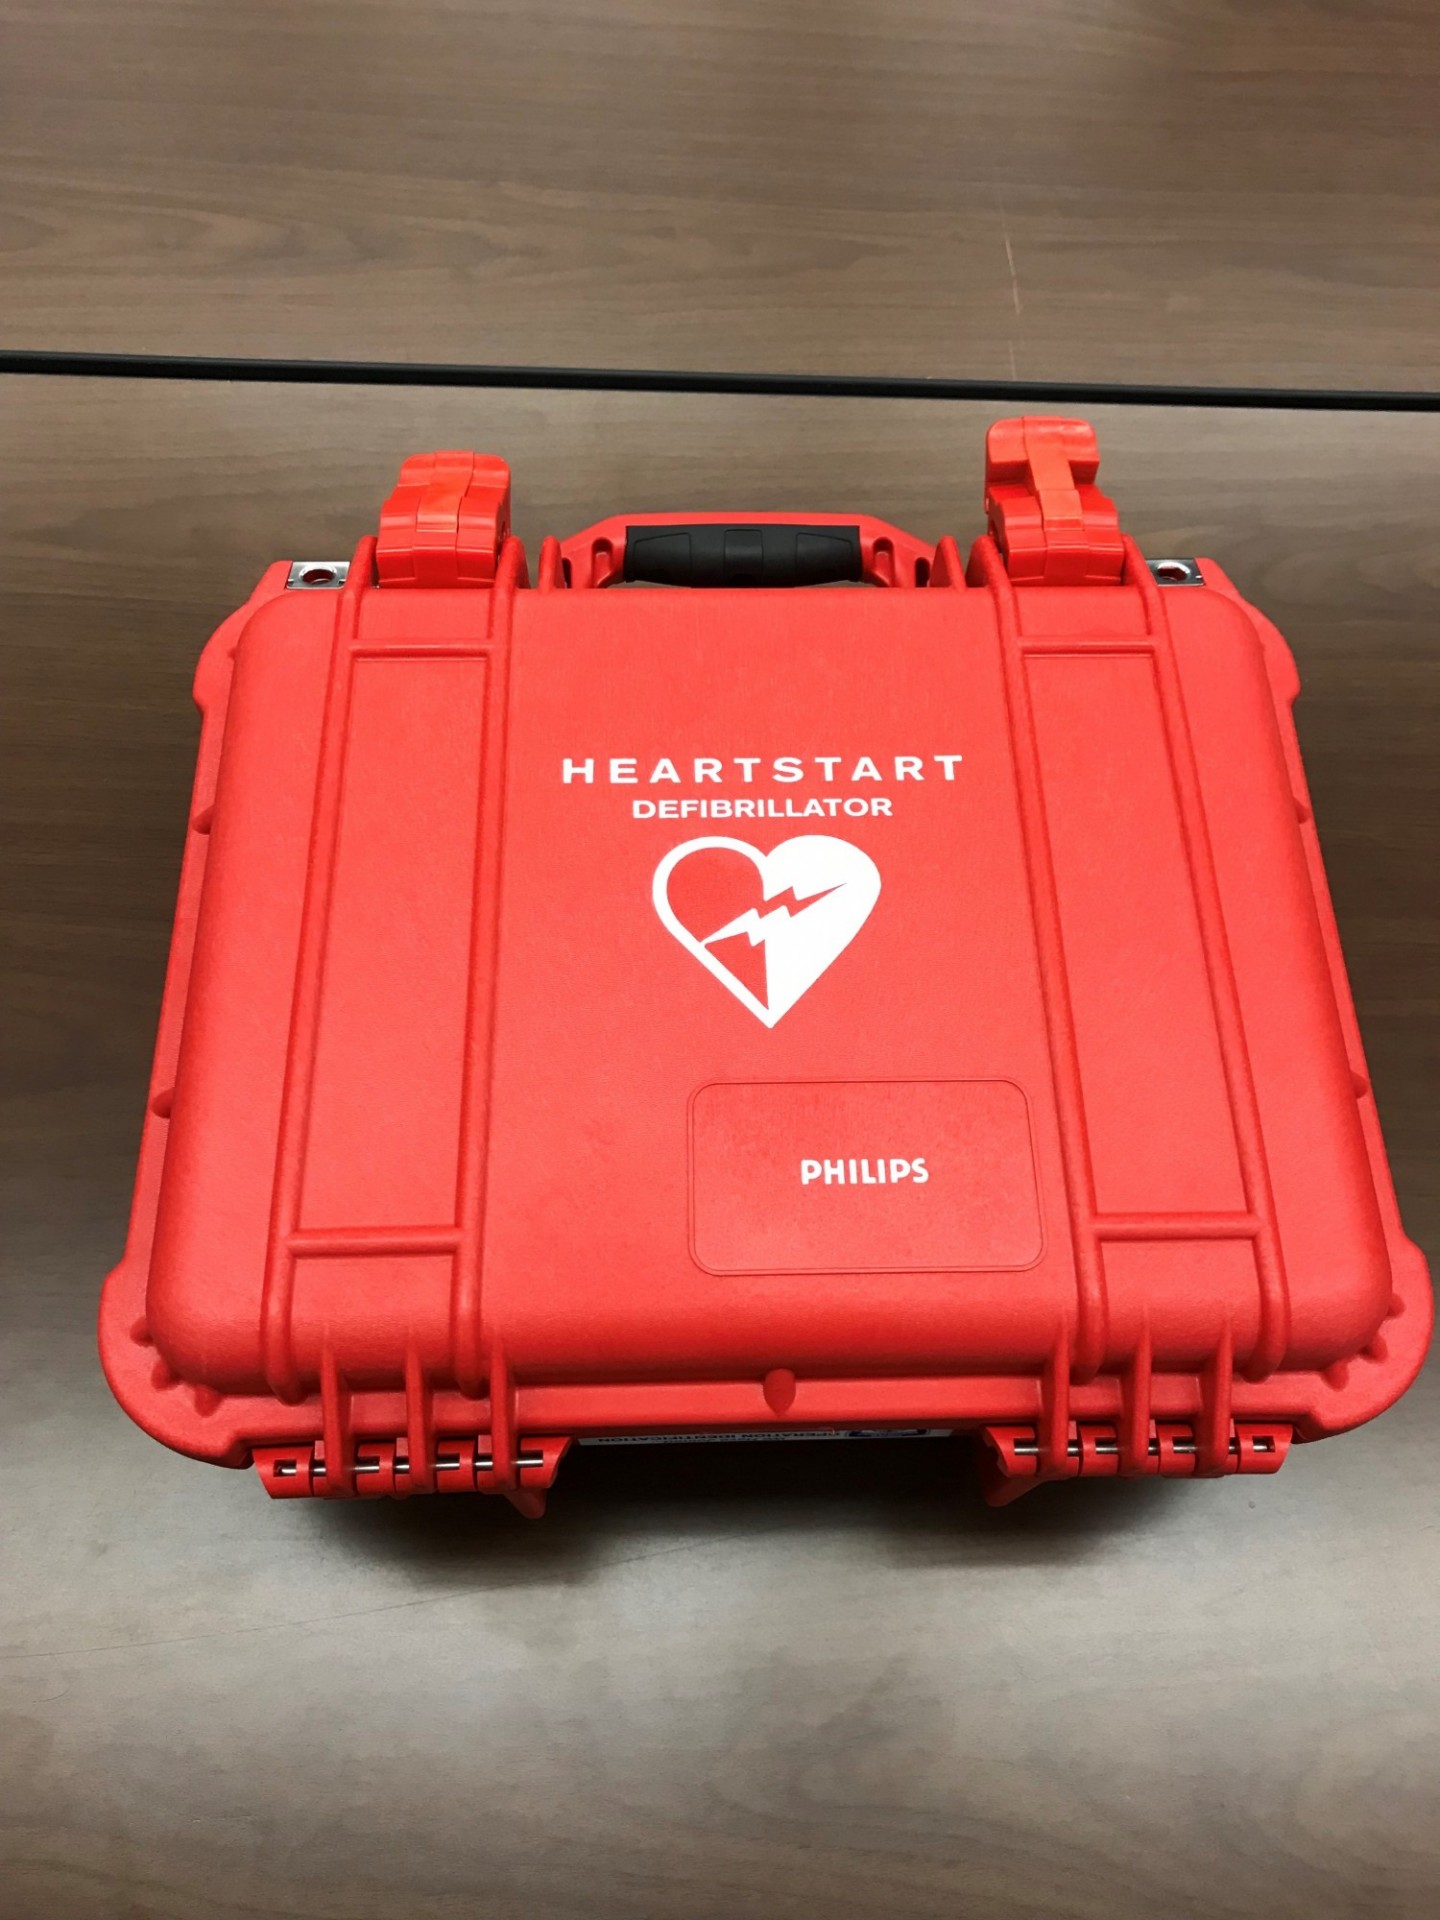 Automated external defibrillators (AEDs) can help save lives on campus in the event of cardiac health emergencies